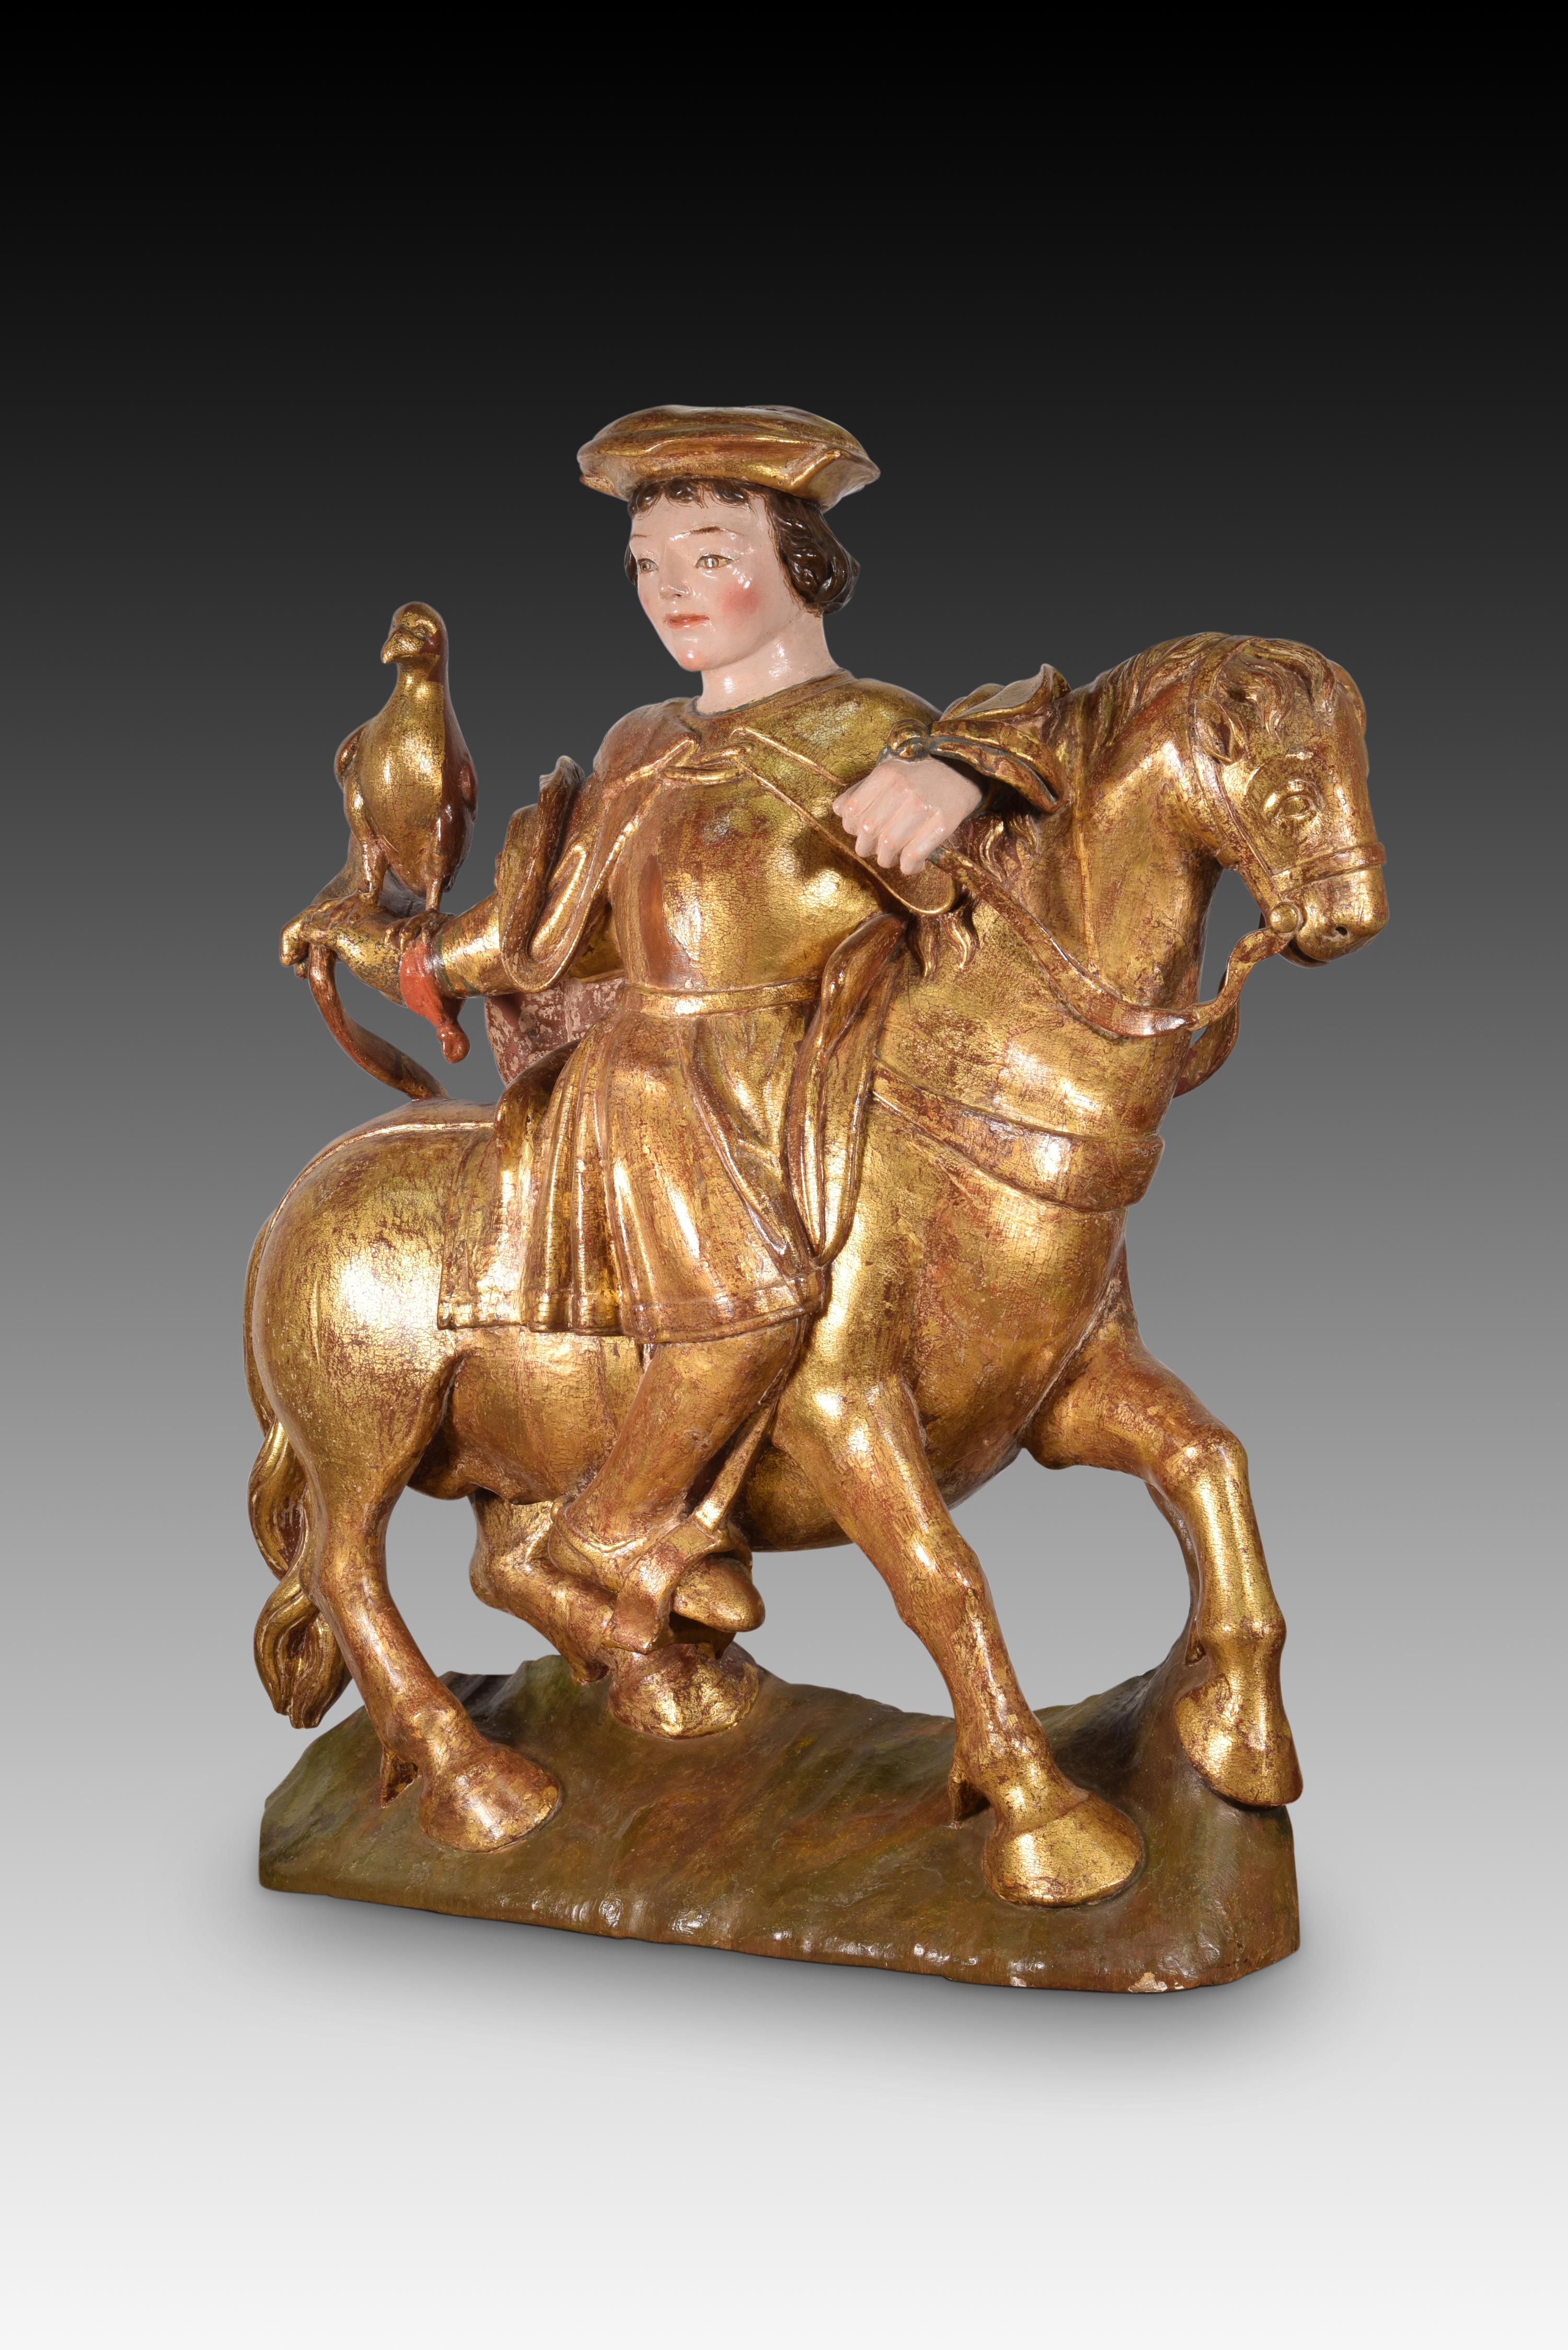 Possibly Saint Hubertus or Saint Eustace. Carved, polychrome and gilded wood. Spanish school, 16th century. 
Carving in polychrome and gilded wood, simply roughened on the back, showing a richly dressed young horseman, wearing a flat hat, and with